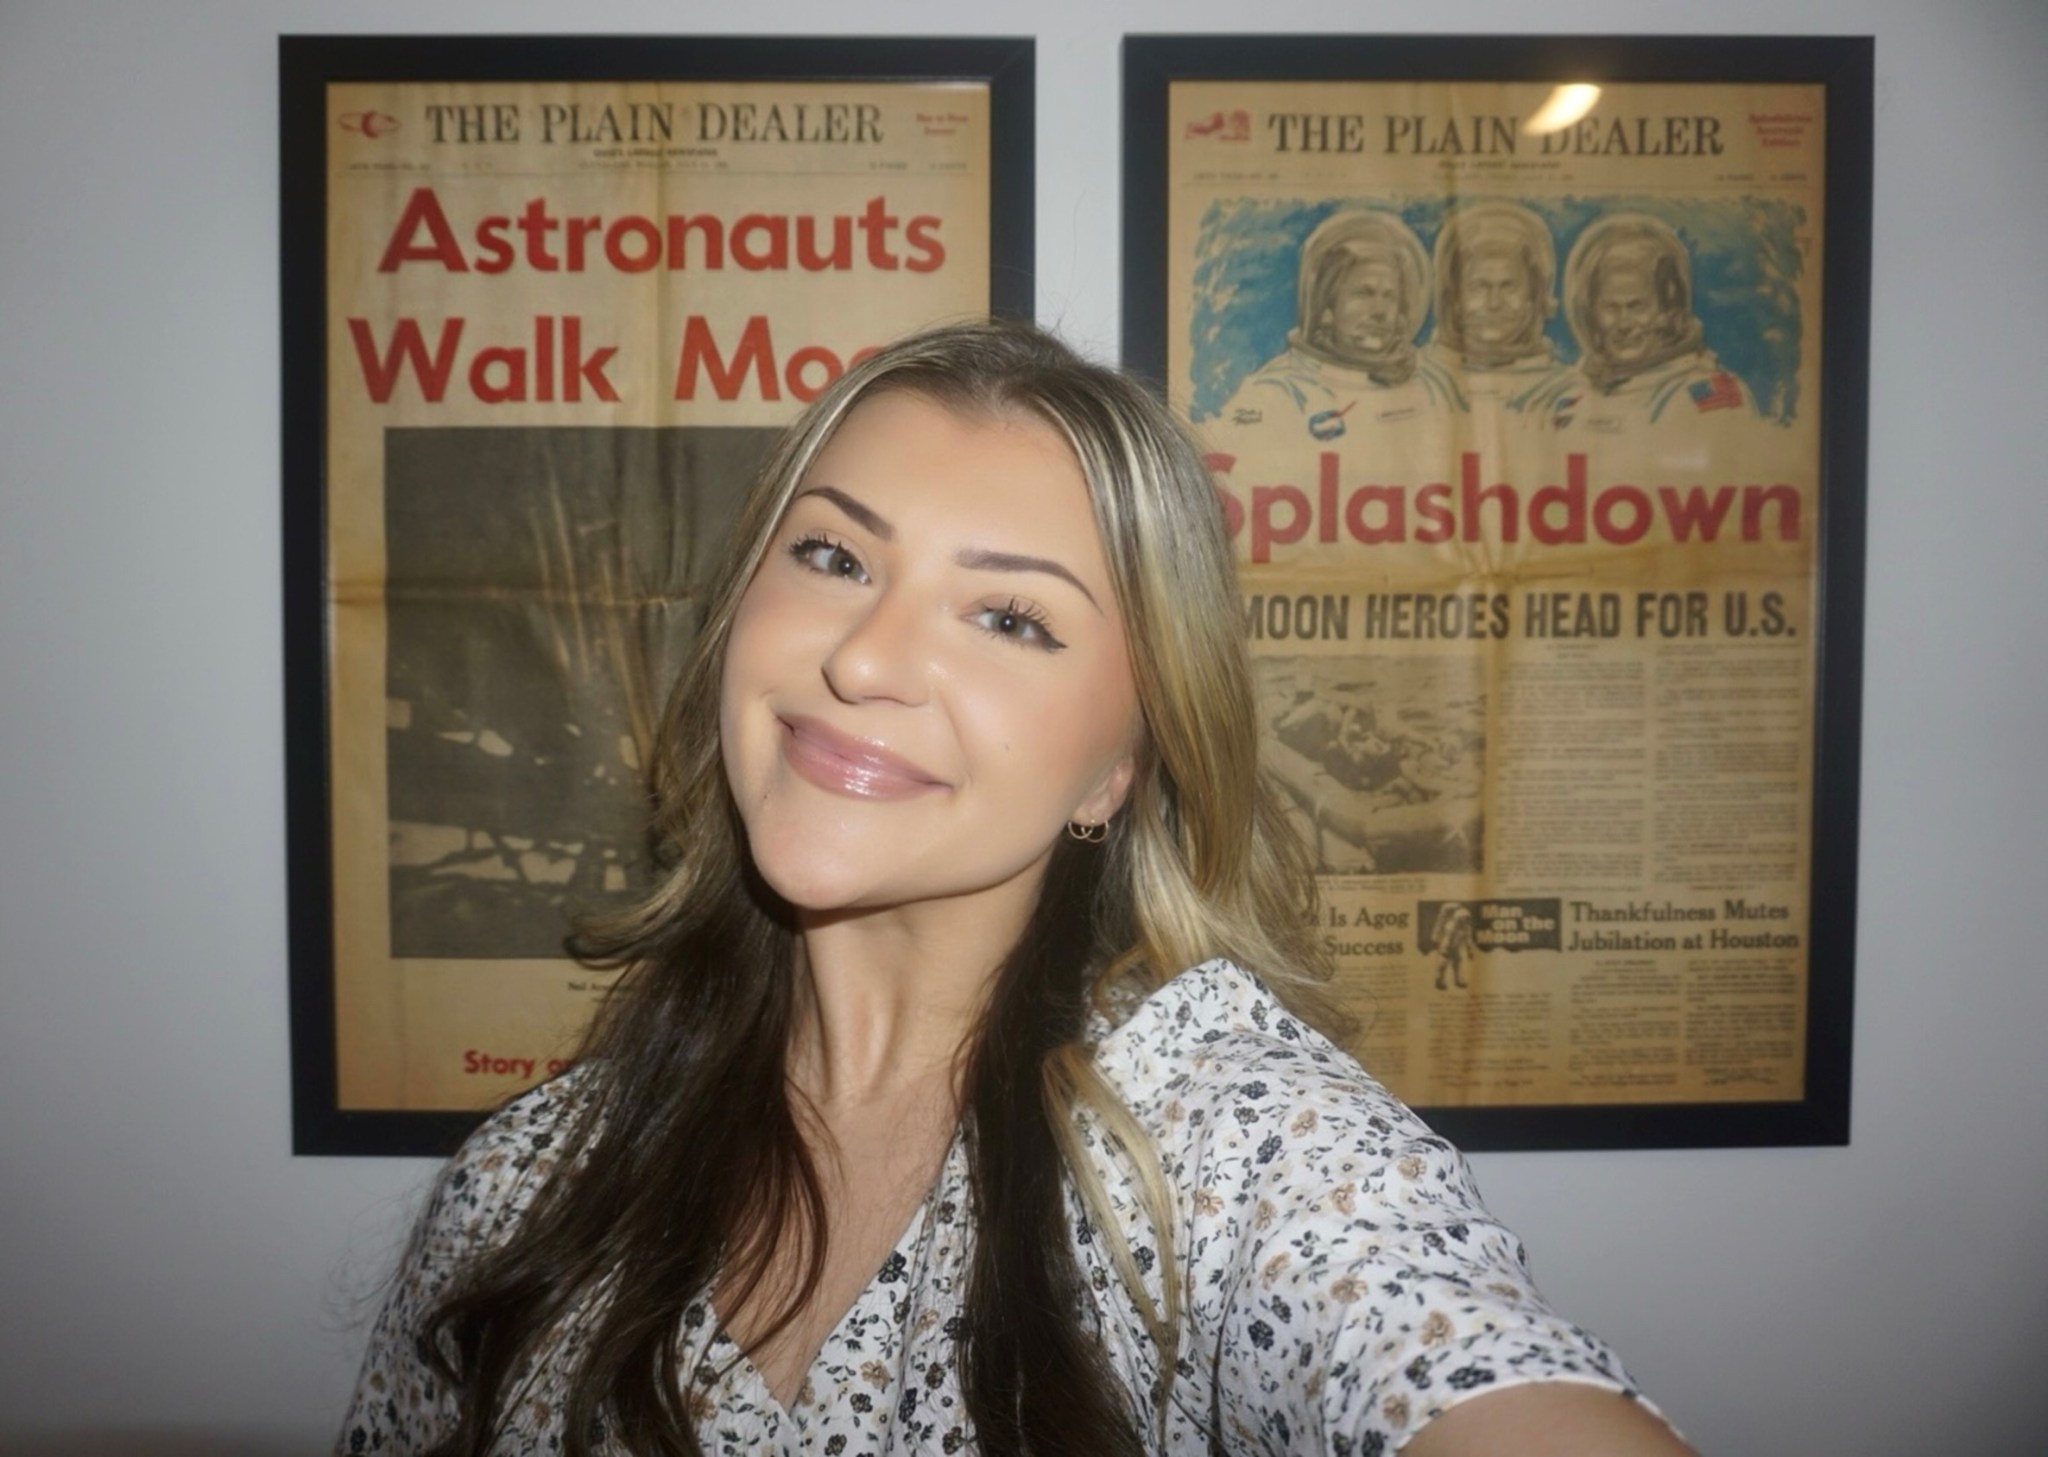 Cassi Meyer, a NASA Lawyer, wearing a white blouse with small flowers, poses in her selfie with two framed newspaper front pages hanging on the wall behind her.